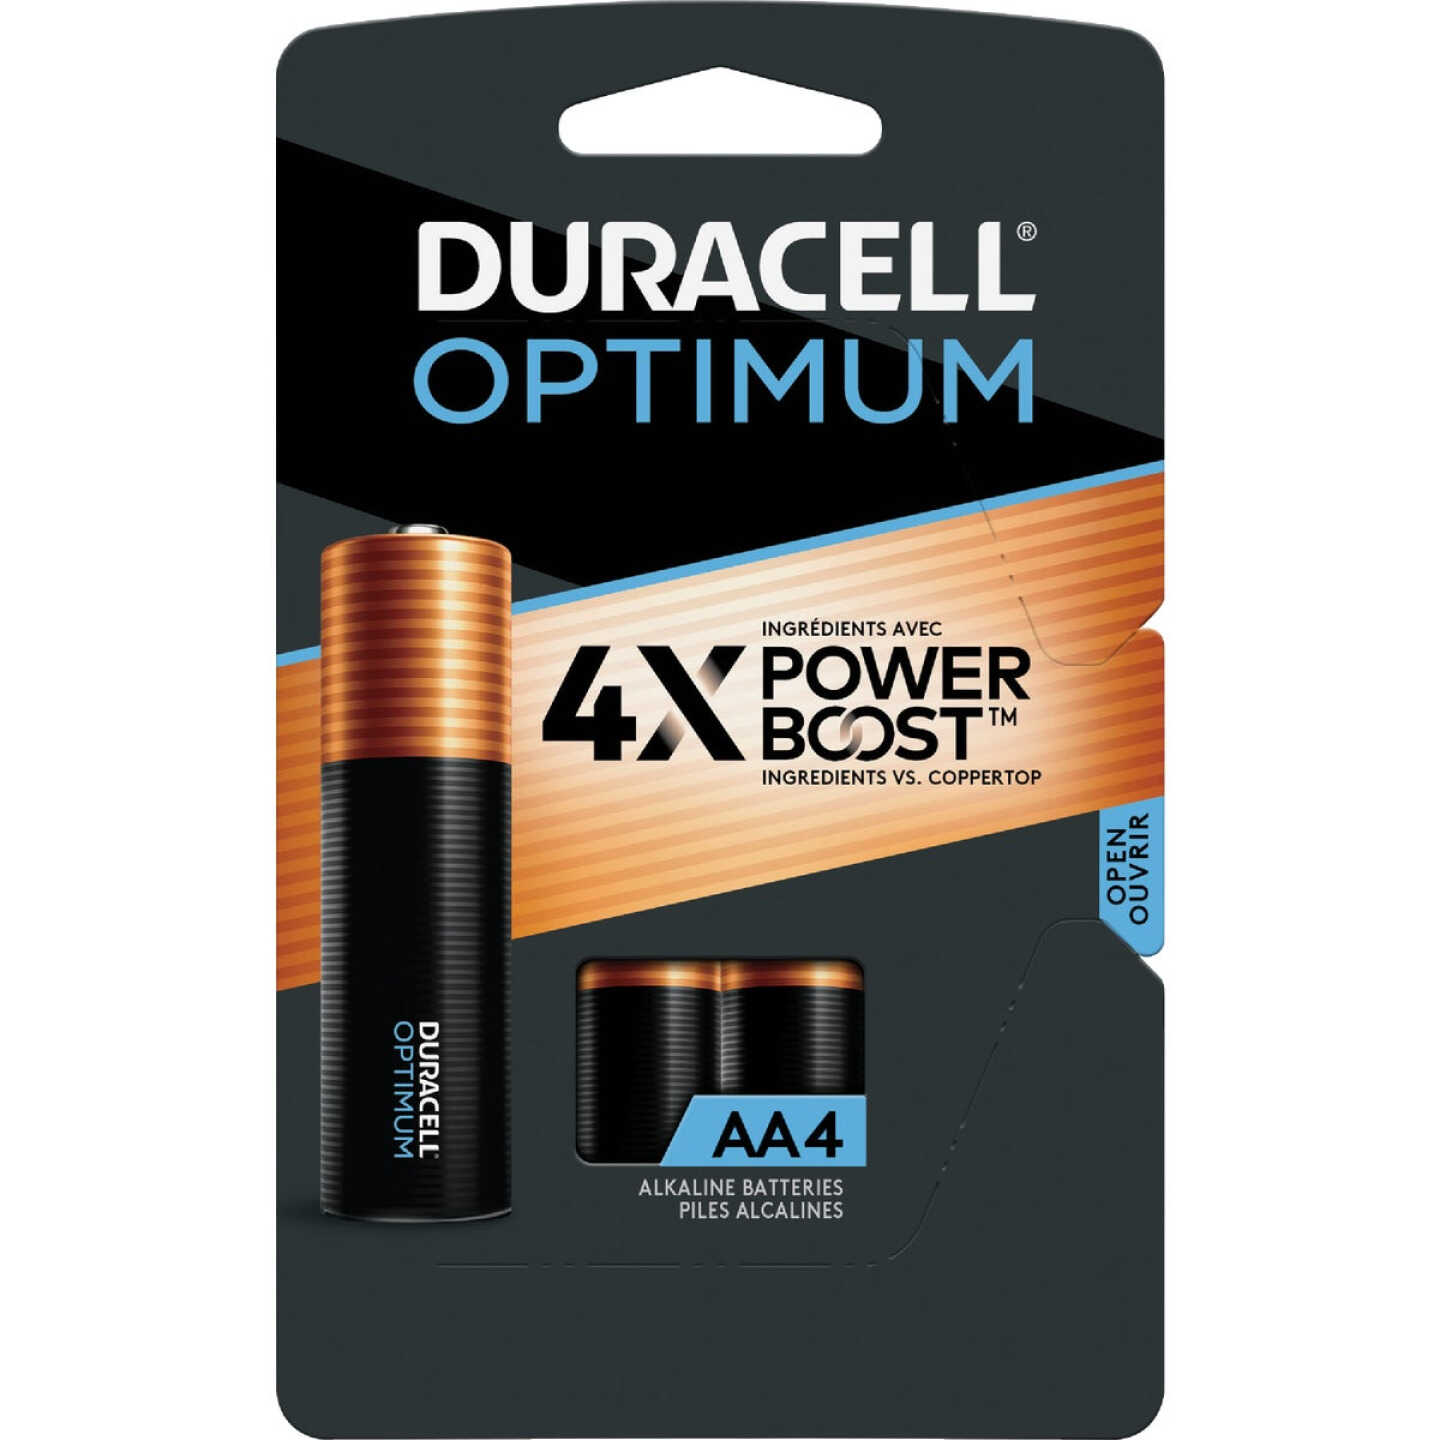 AA Duracell Battery (Pack 4)